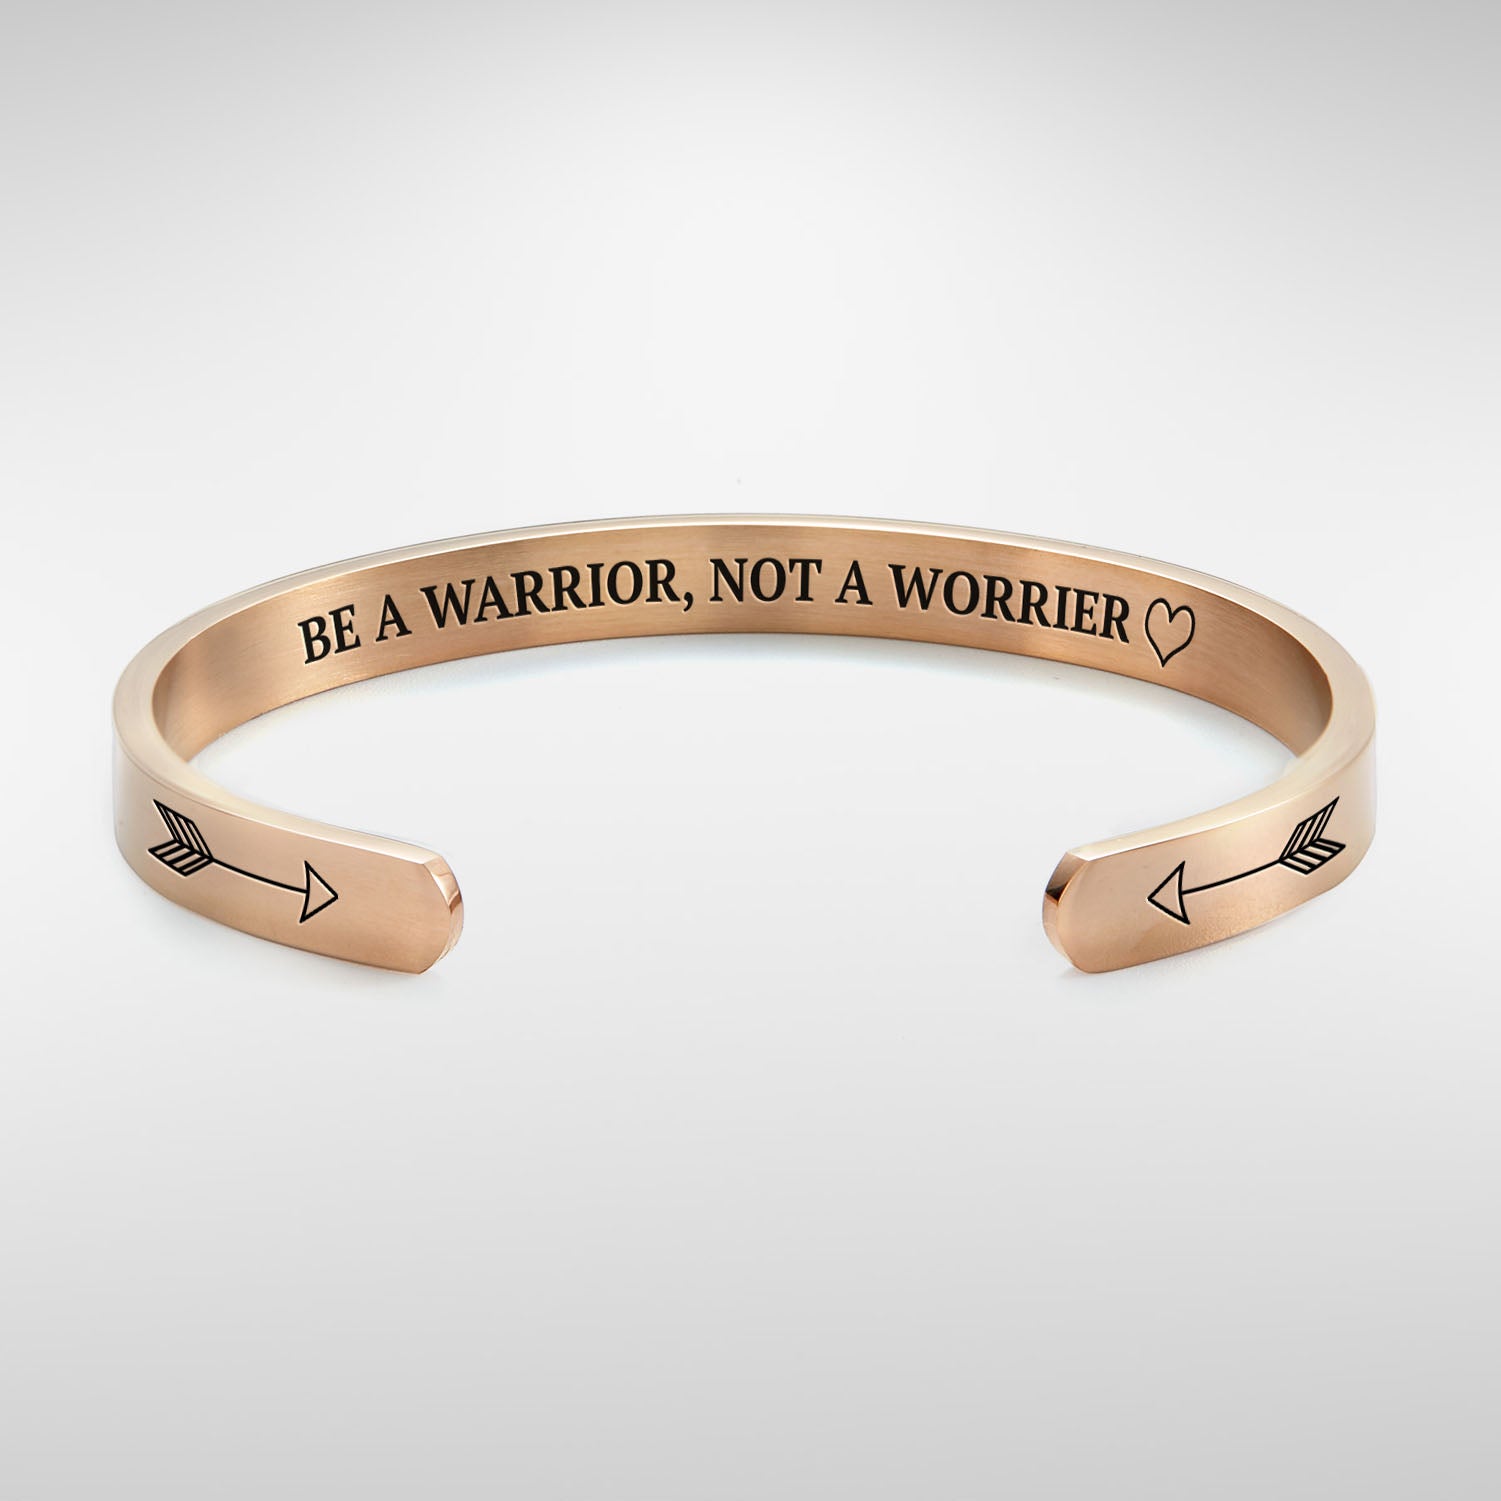 Be a warrior, not a worrier bracelet with rose gold plating